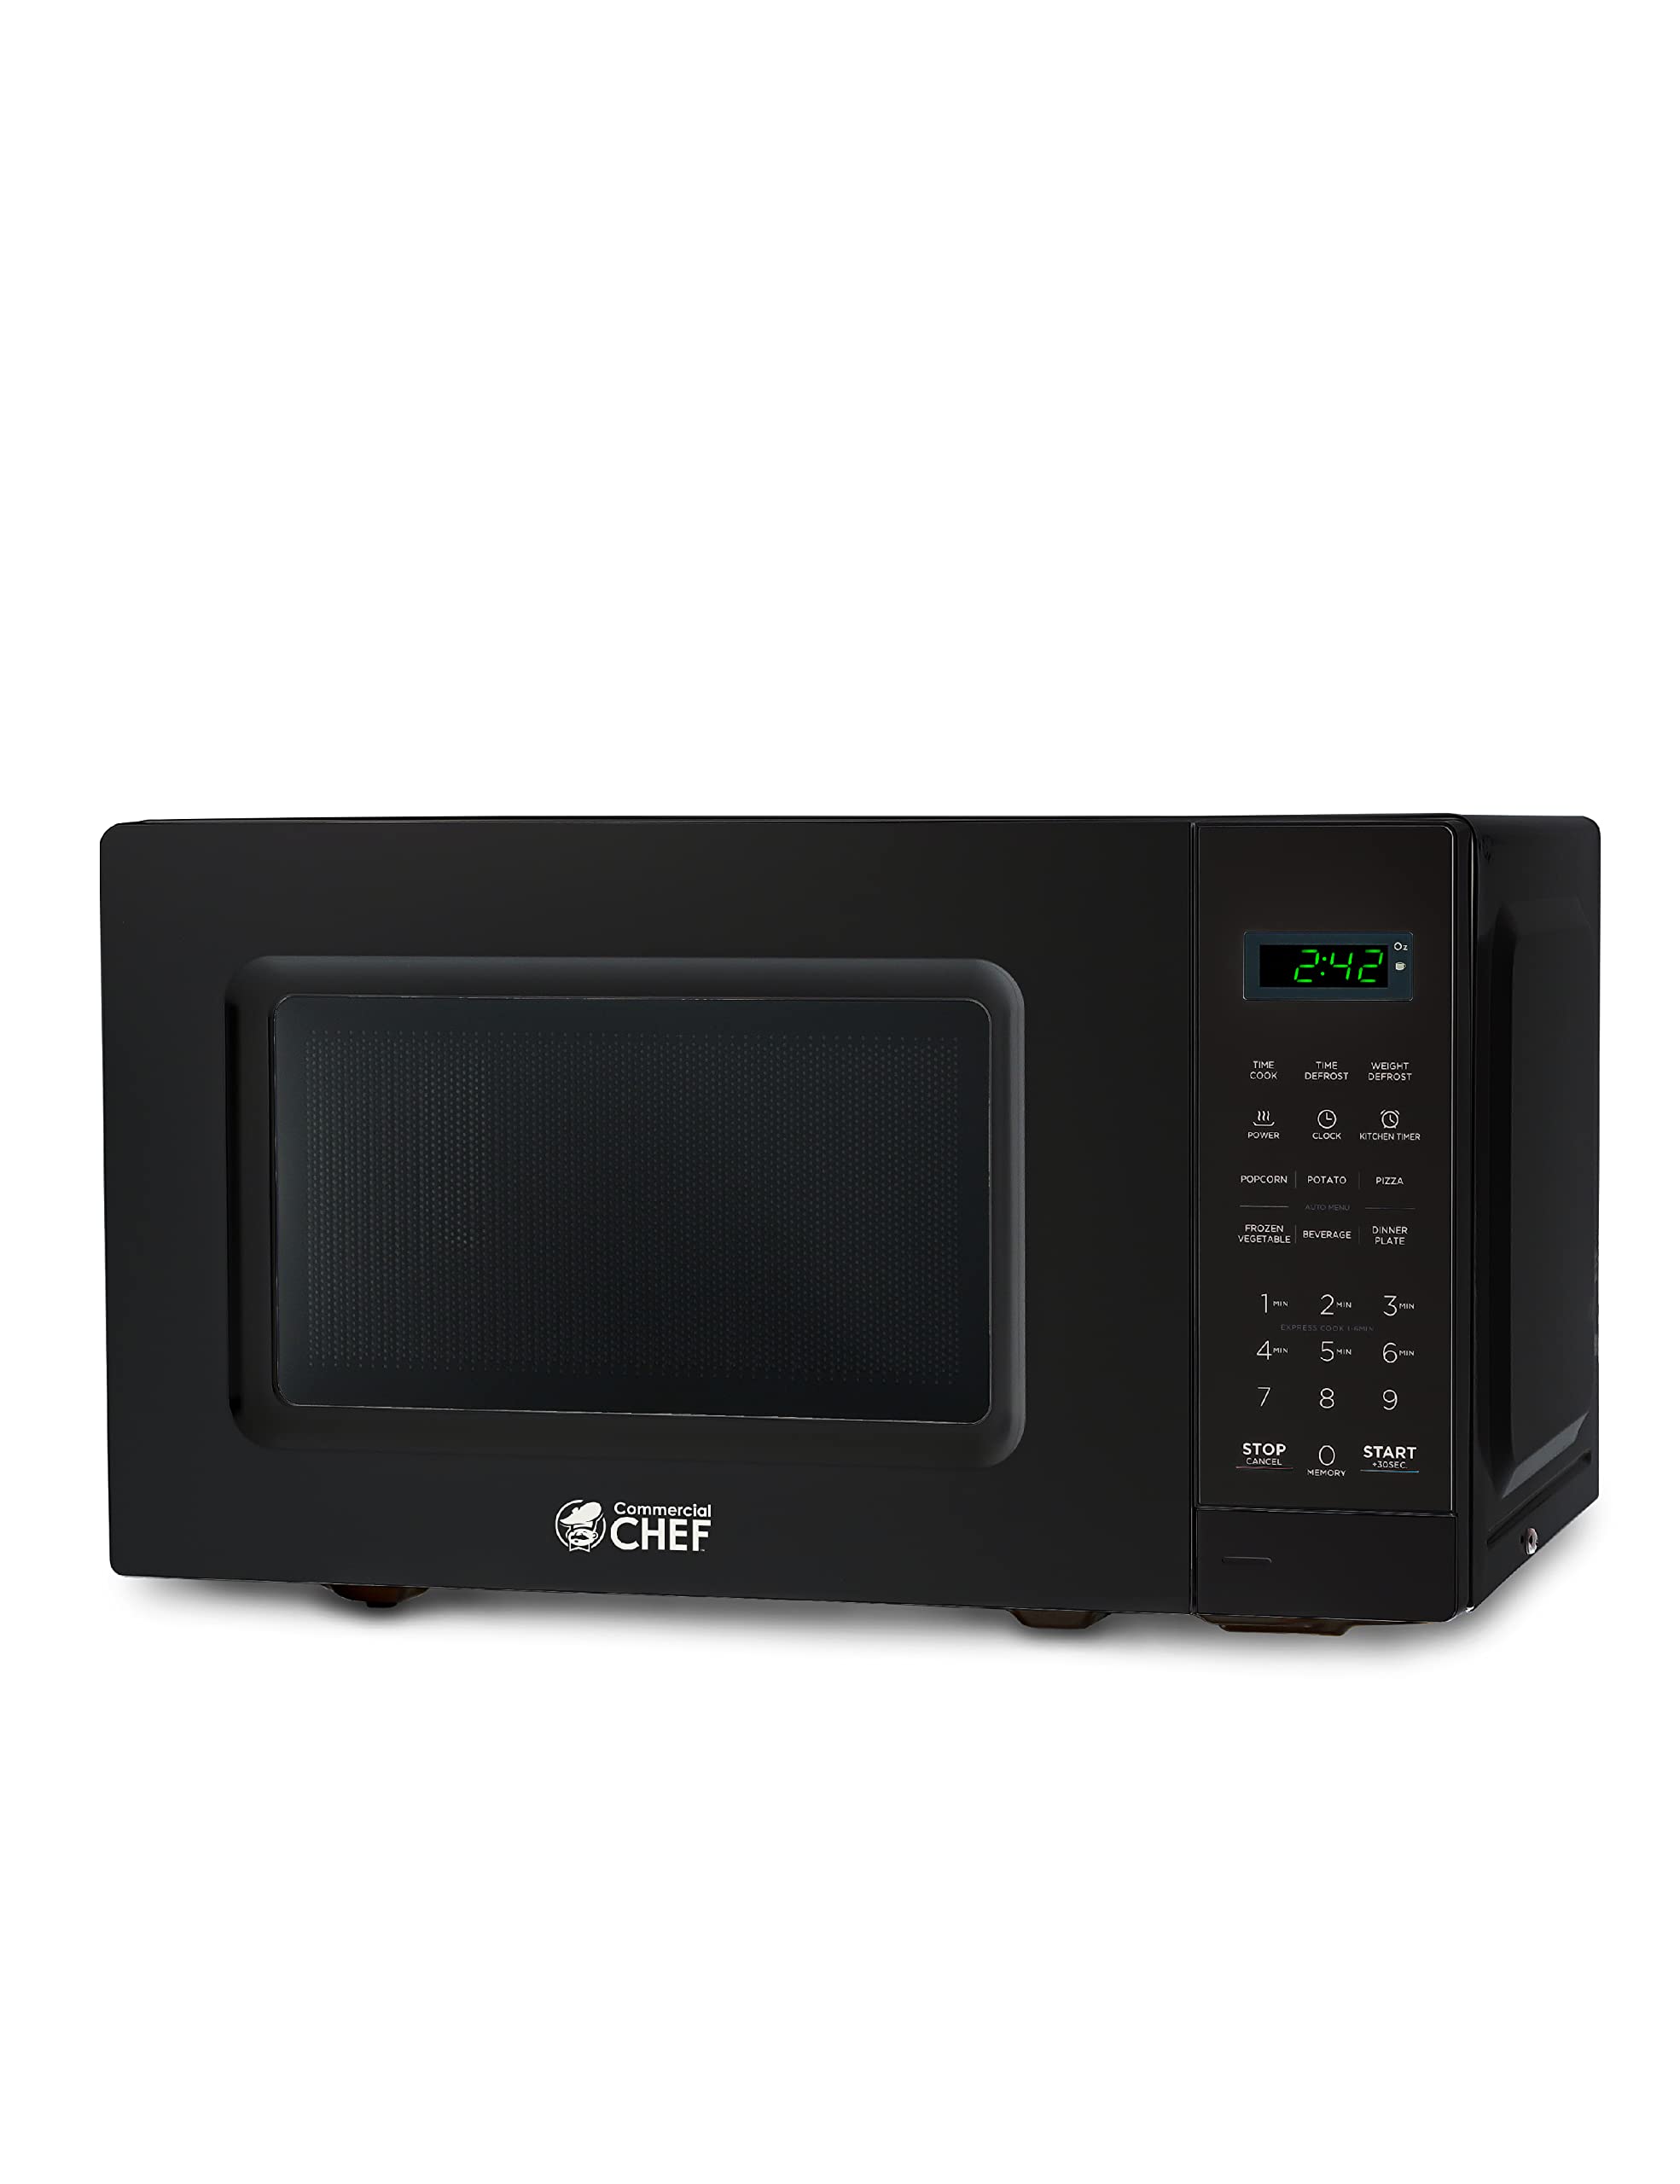 Commercial CHEF Countertop Microwave Oven, 0.6 Cu. Ft, ...